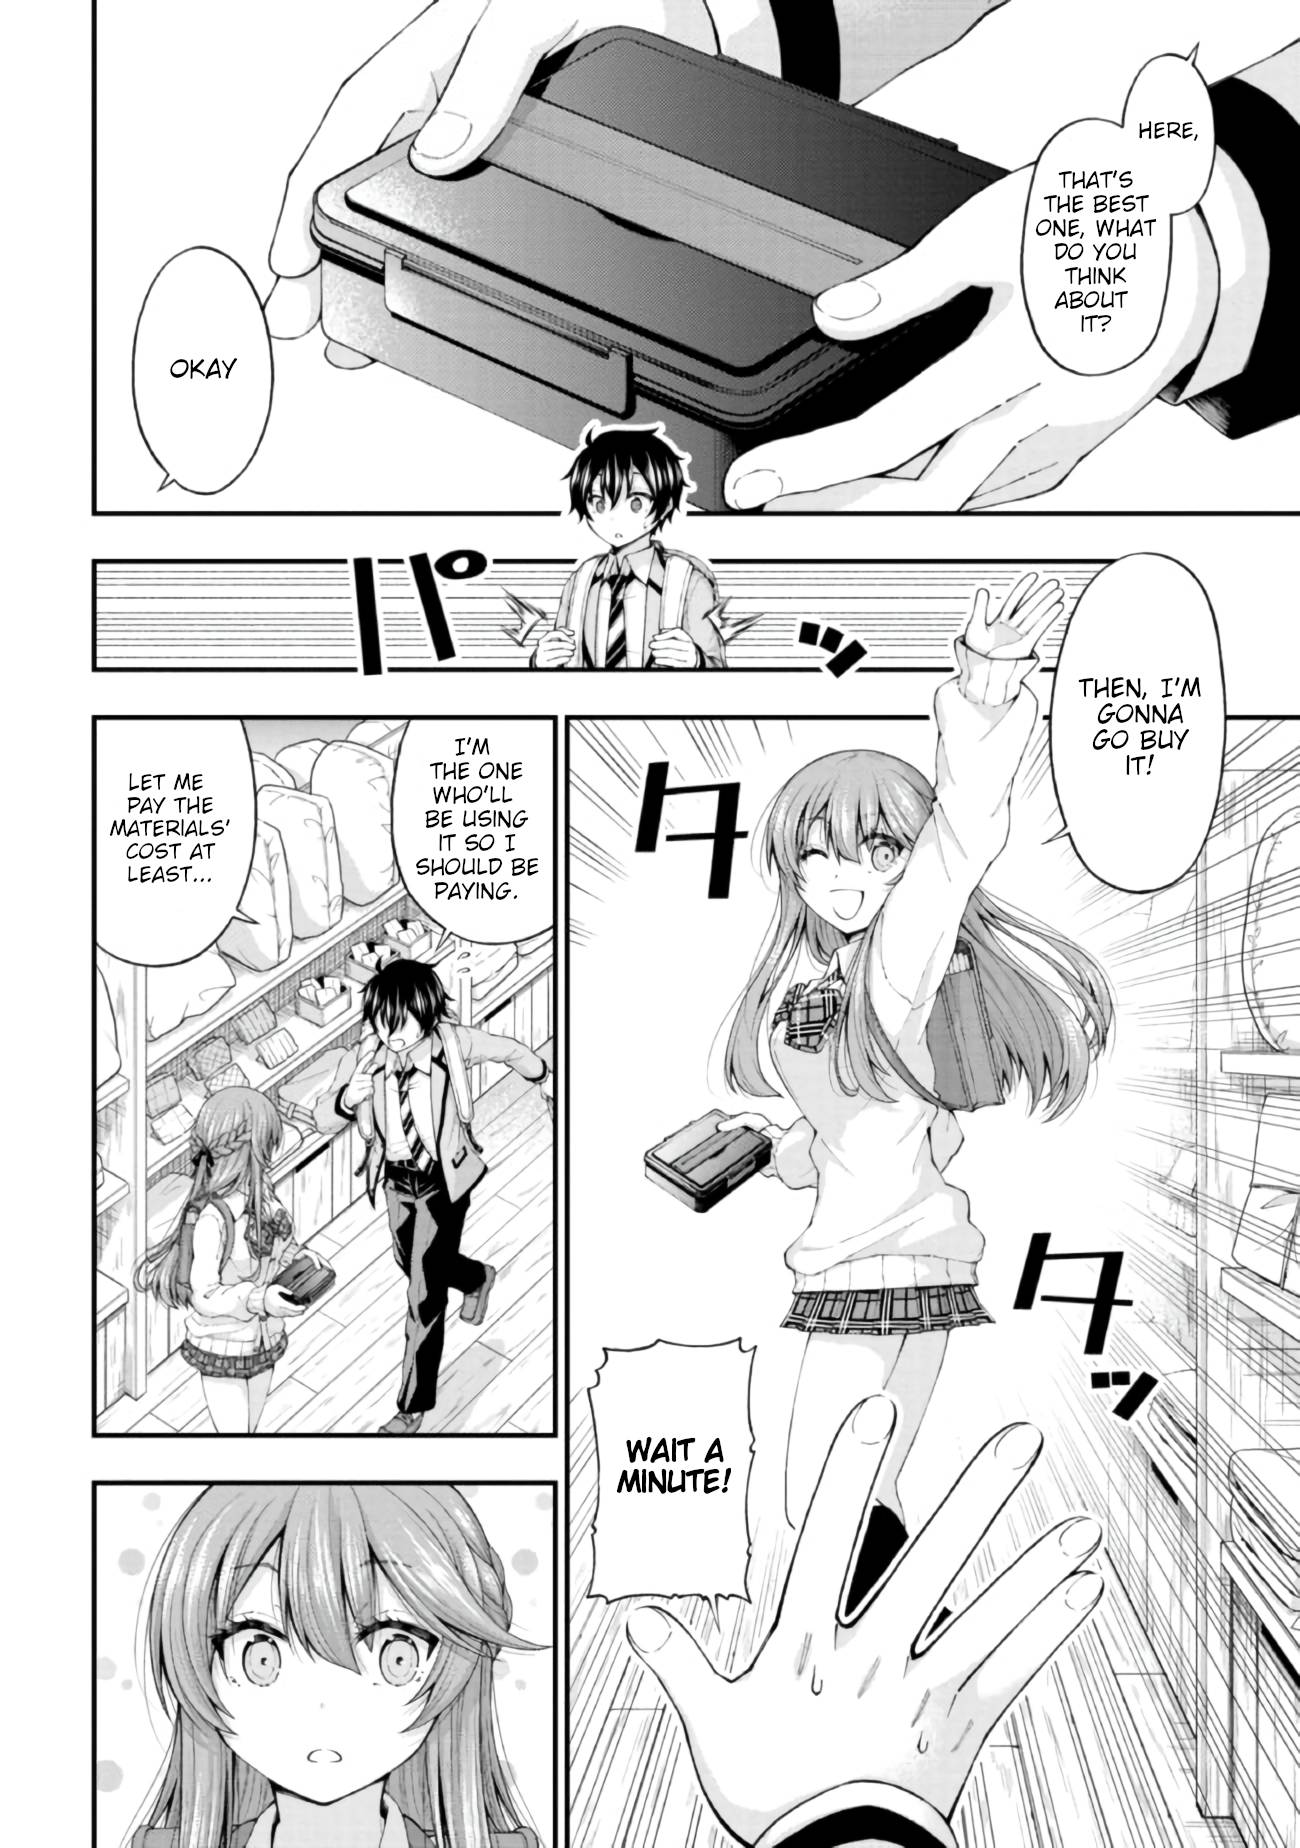 The Gal Who Was Meant to Confess to Me as a Game Punishment - chapter 4 - #6